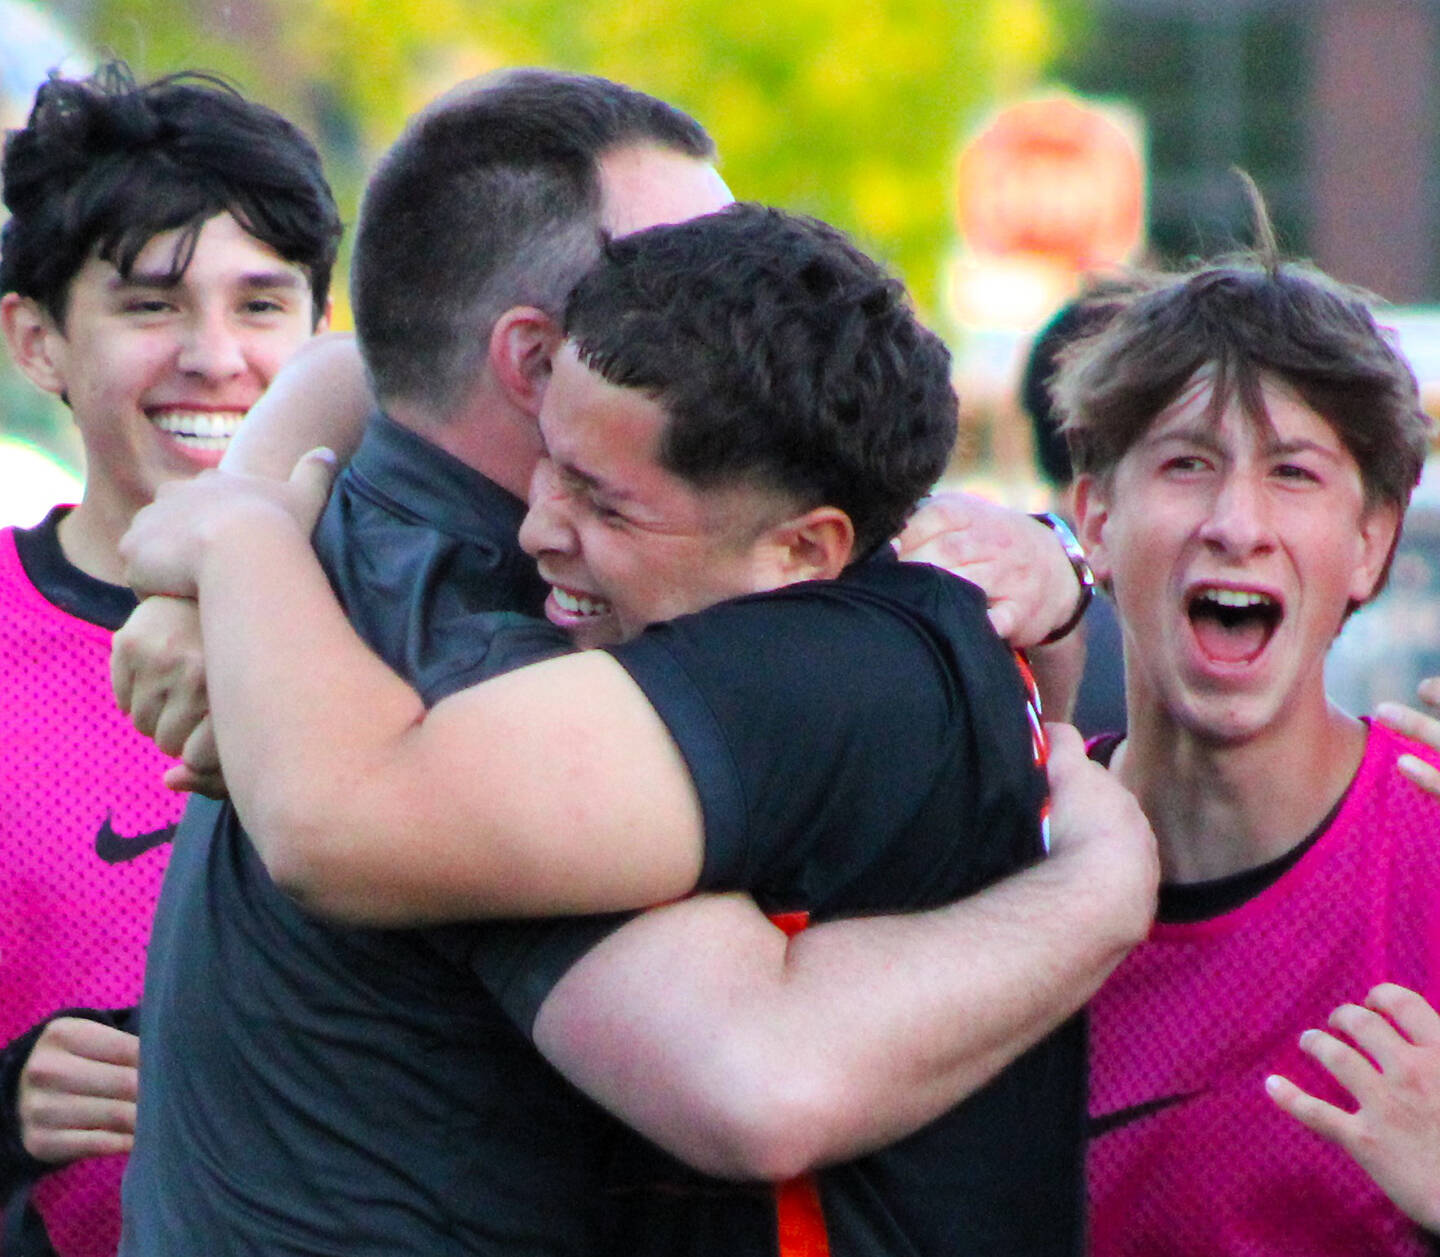 Elisha Meyer/Kitsap News Group photos
Central Kitsap soccer coach Patrick Leonard and junior Joshua Voce embrace, surrounded by cheering teammates after Voce’s game-winning shot.